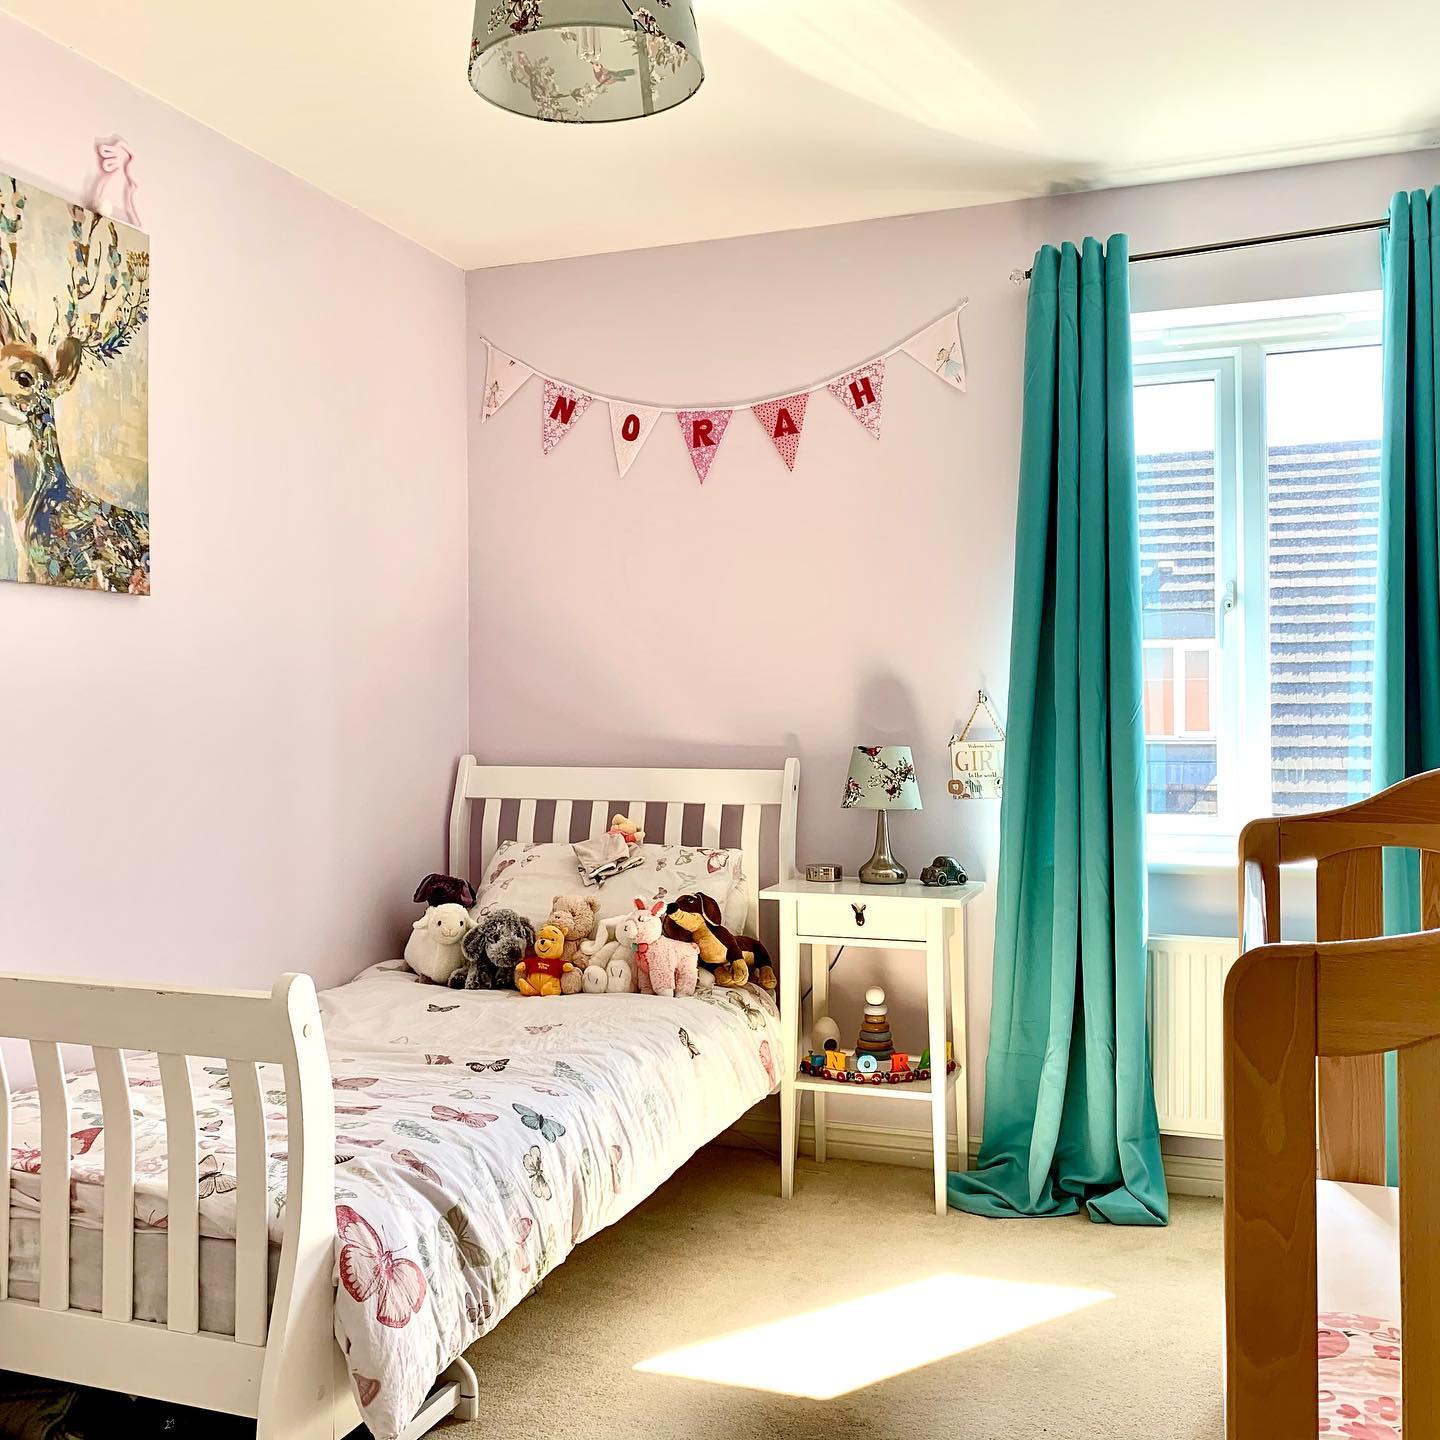 A lilac painted kids room with stuffed animals on the bed.